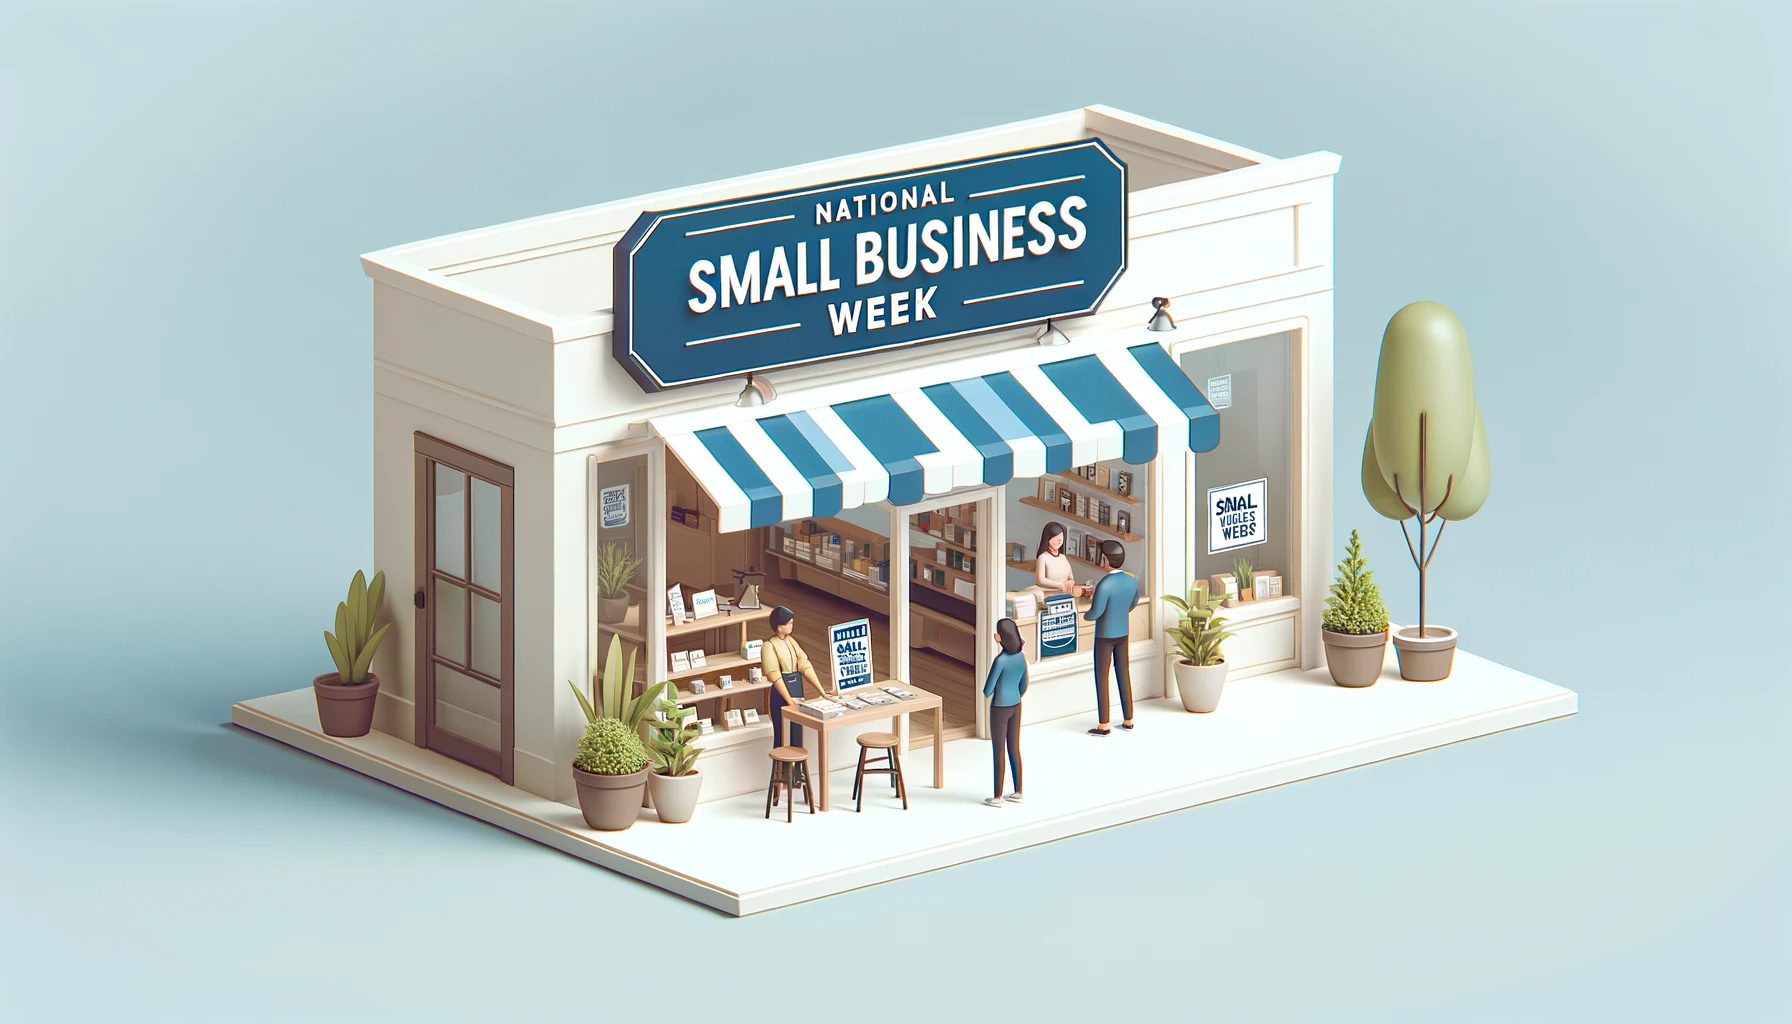 Happy Small Business Week!